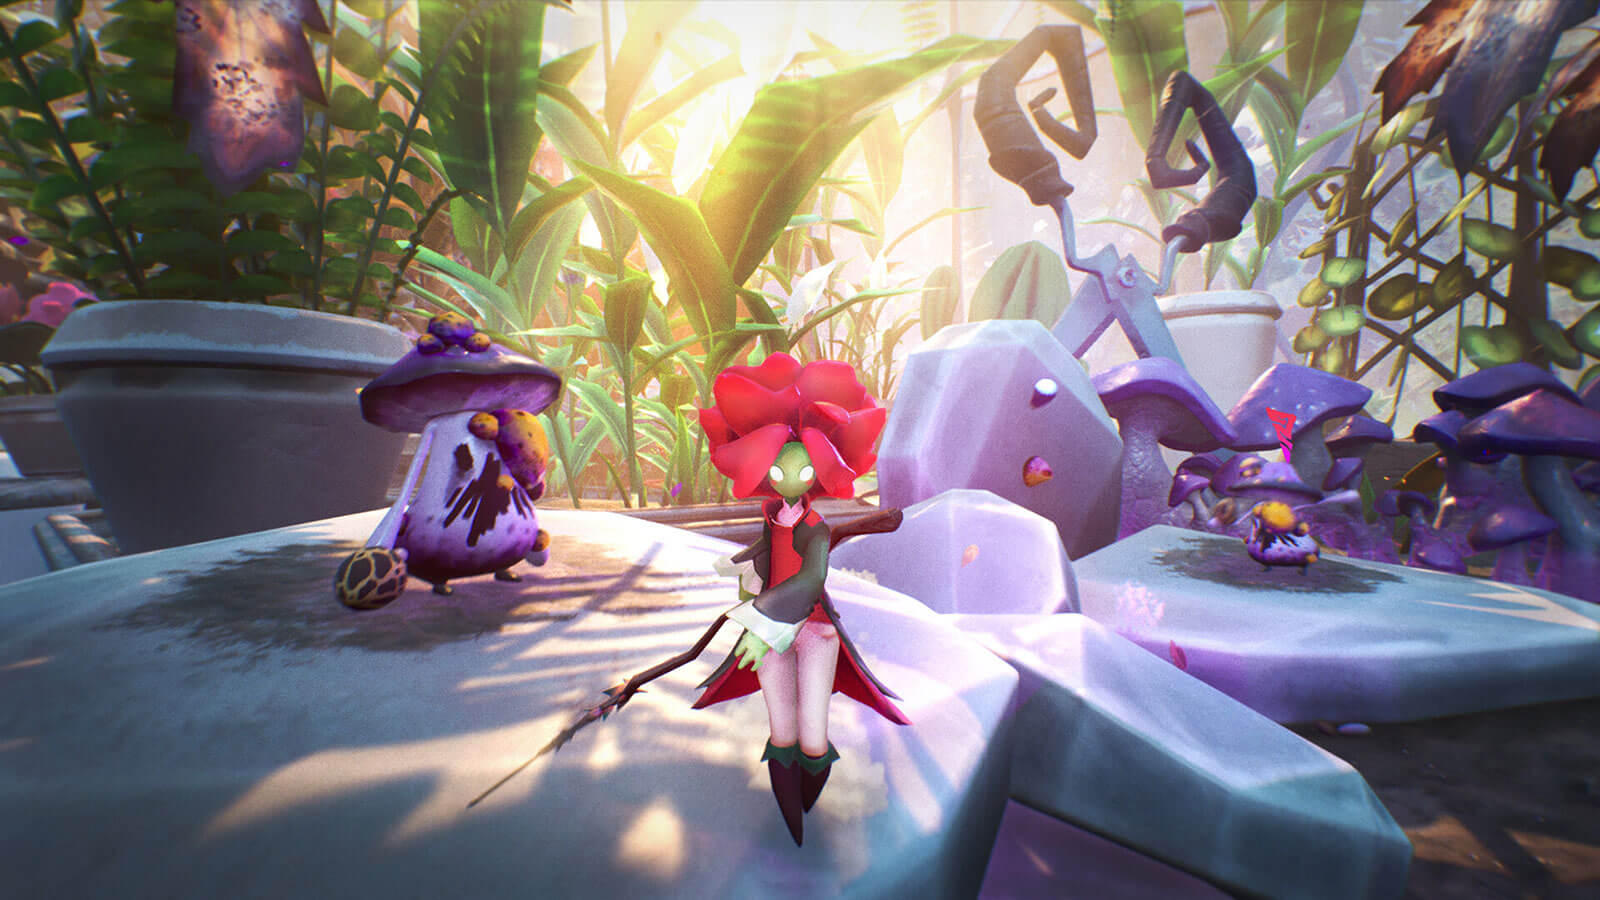 A tiny rose character stands in front of two purple mushroom enemies.